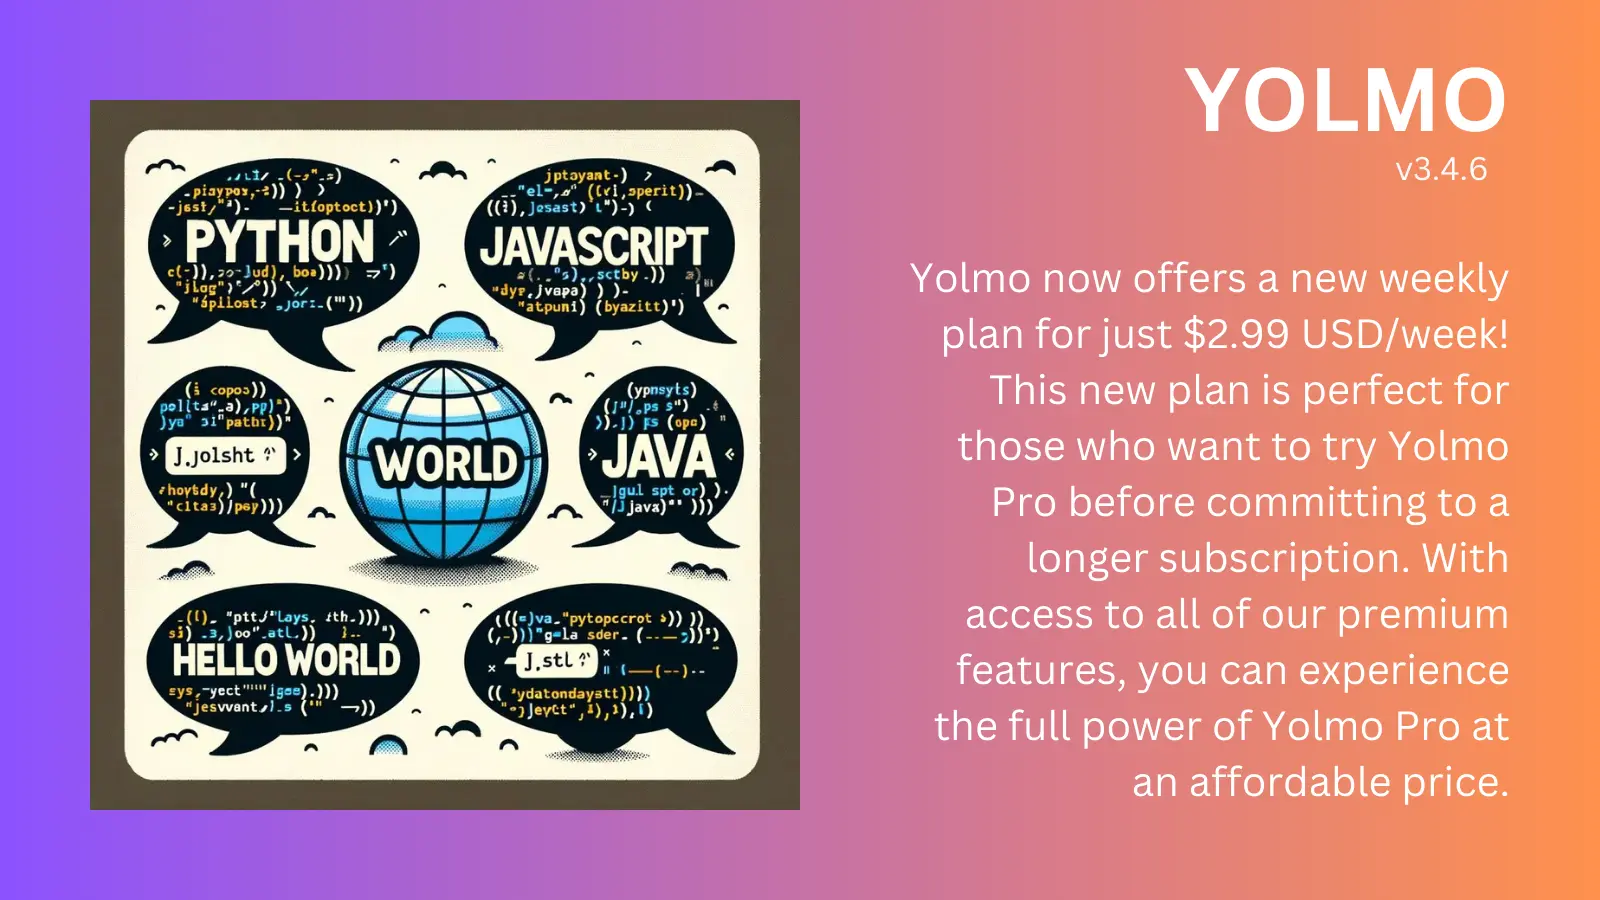 We're excited to announce that Yolmo now offers a new weekly plan for just $2.99 USD/week! This new plan is perfect for those who want to try Yolmo Pro before committing to a longer subscription. With access to all of our premium features, you can experience the full power of Yolmo Pro at an affordable price. Don't miss out on this exciting opportunity to take your productivity to the next level!